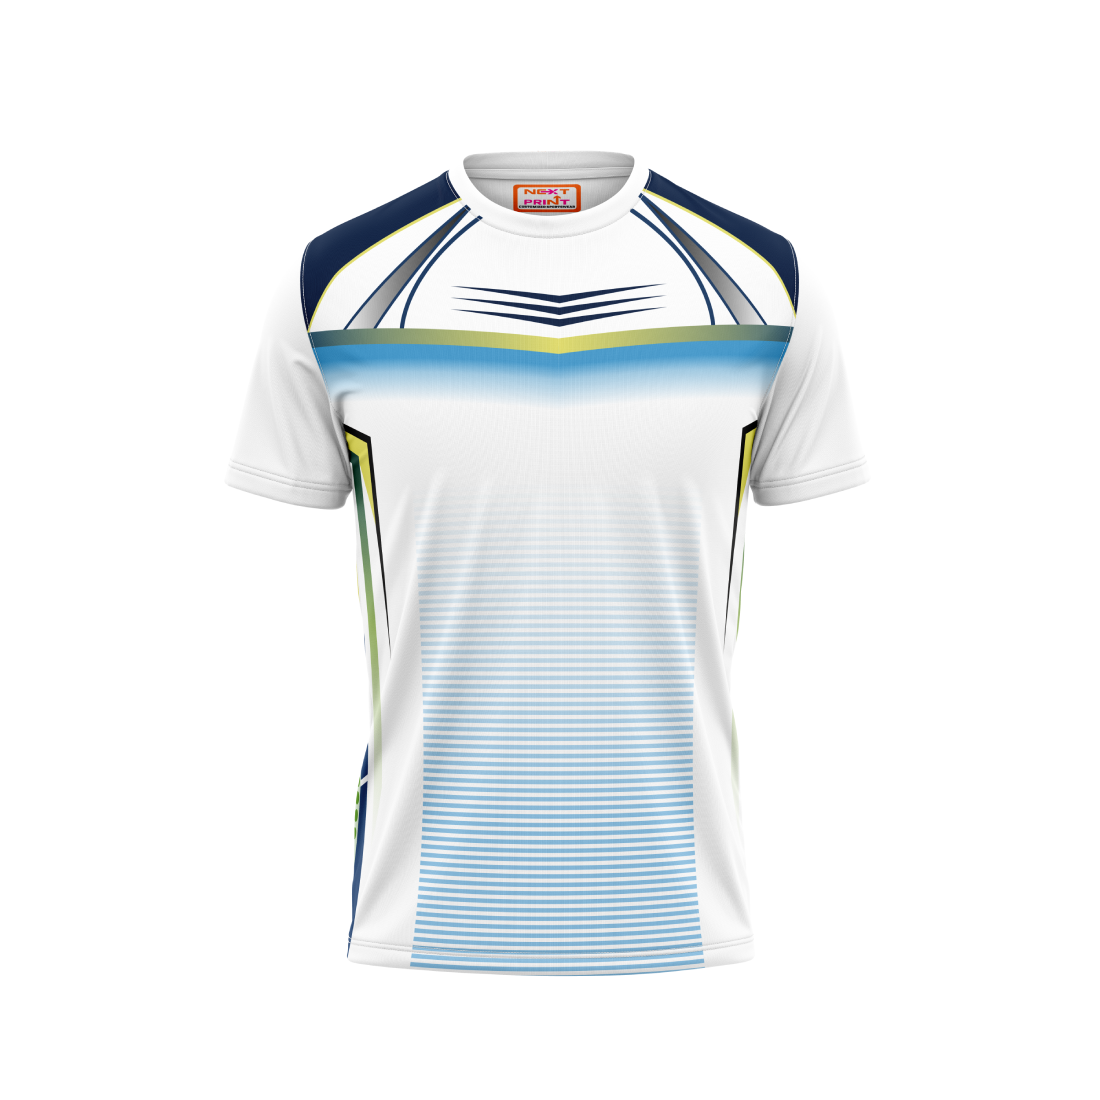 Copy of Round Neck Printed Jersey White NP5000098